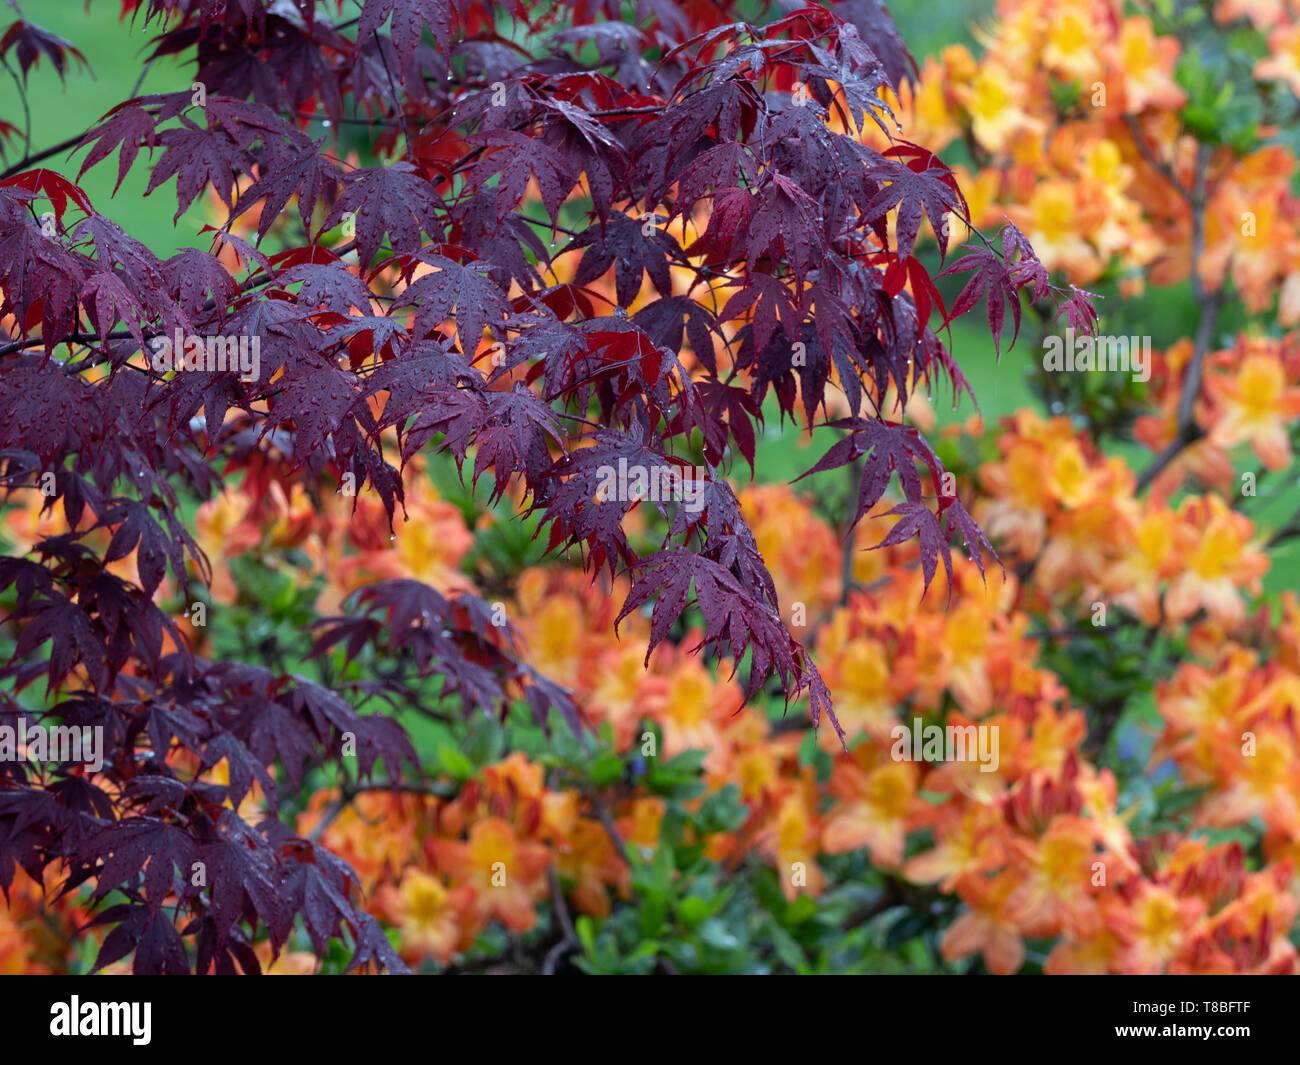 Japanese maple 'Bloodgood' with rhododendron in background Stock Photo